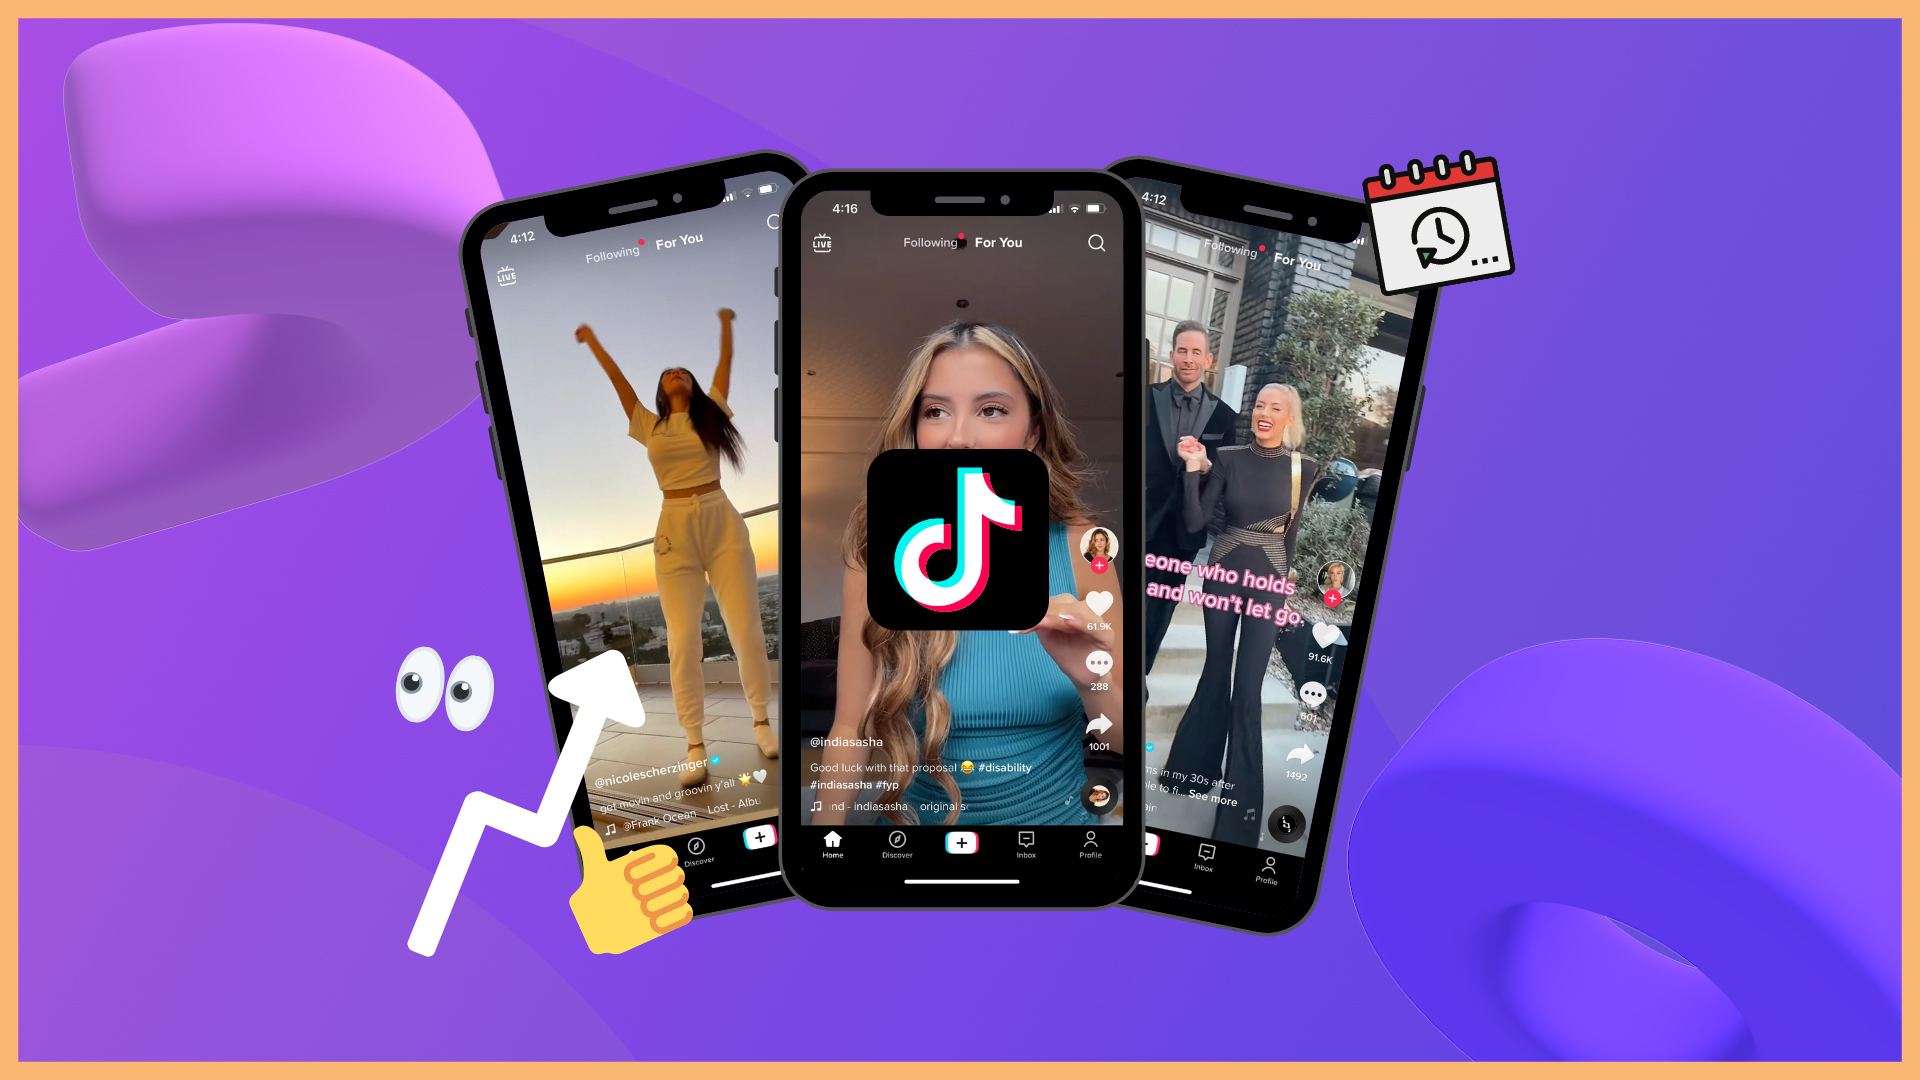 Image showing three phones with the TikTok app open, displayed on a purple background